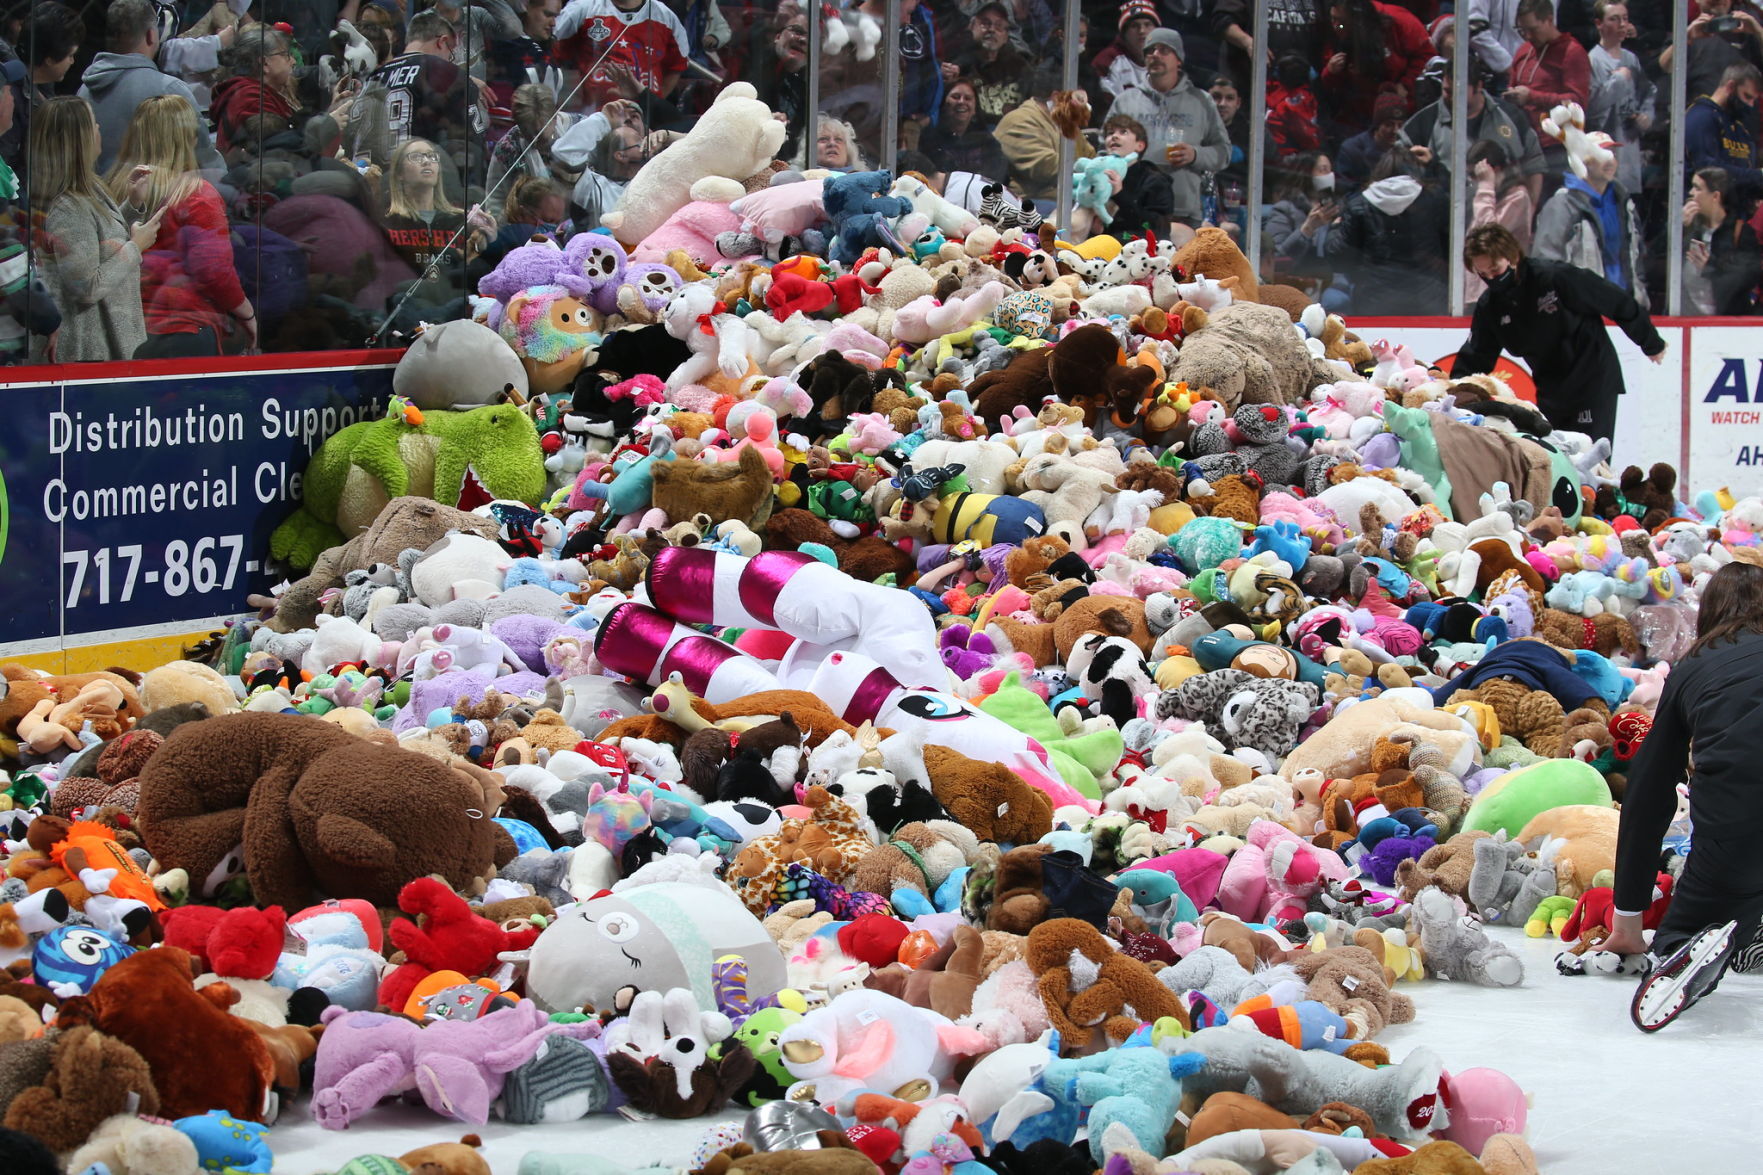 AHL Hershey Bears collect 52,341 stuffed animals, defeat Hartford in Teddy Bear Toss game